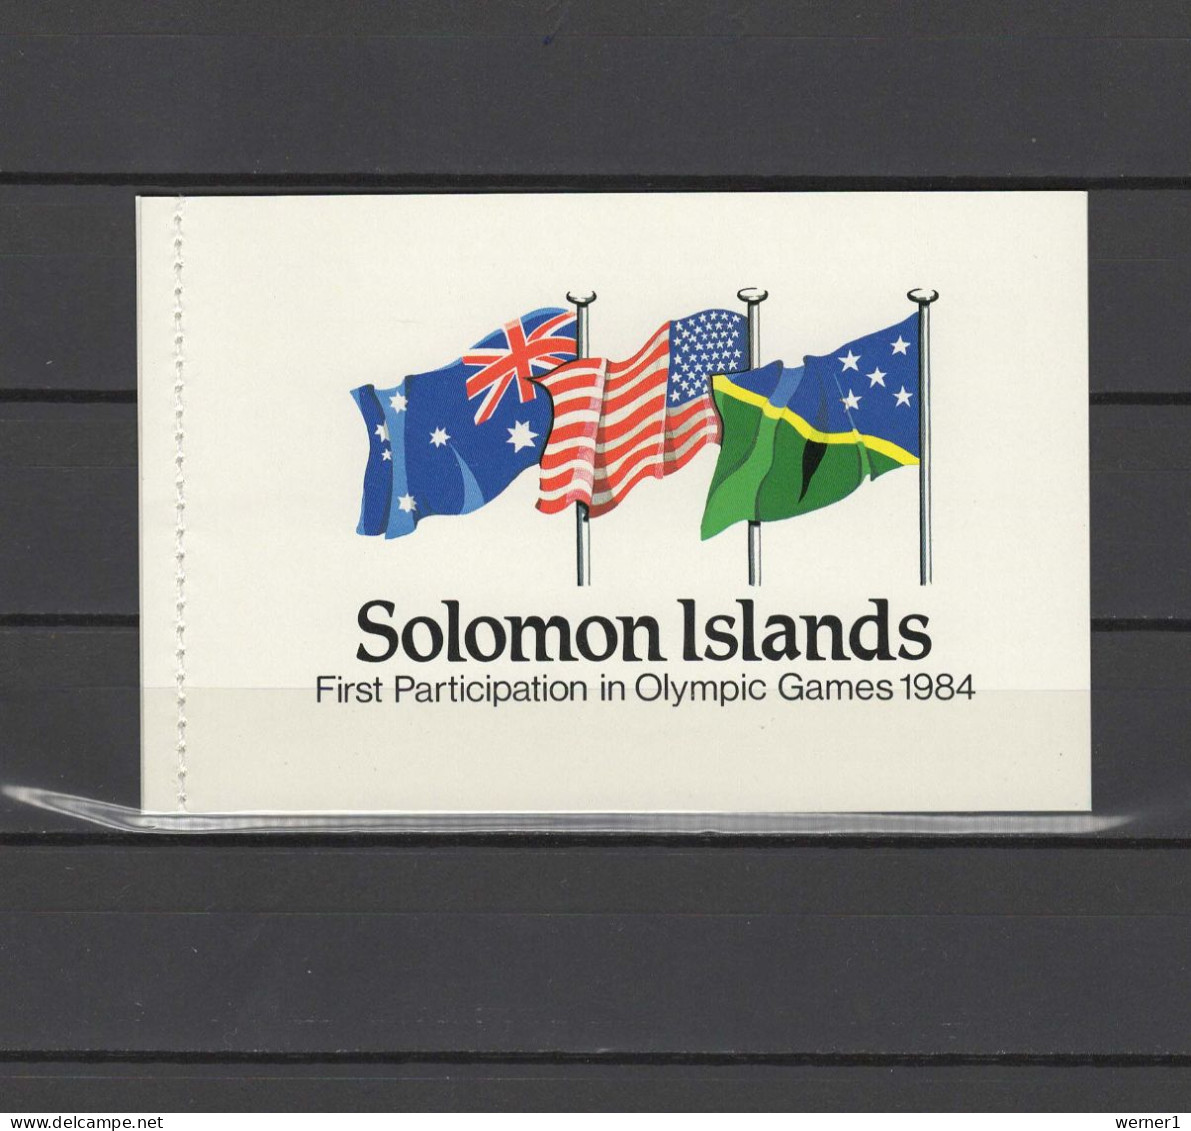 Solomon Islands 1984 Olympic Games Los Angeles Stamp Booklet MNH - Verano 1984: Los Angeles